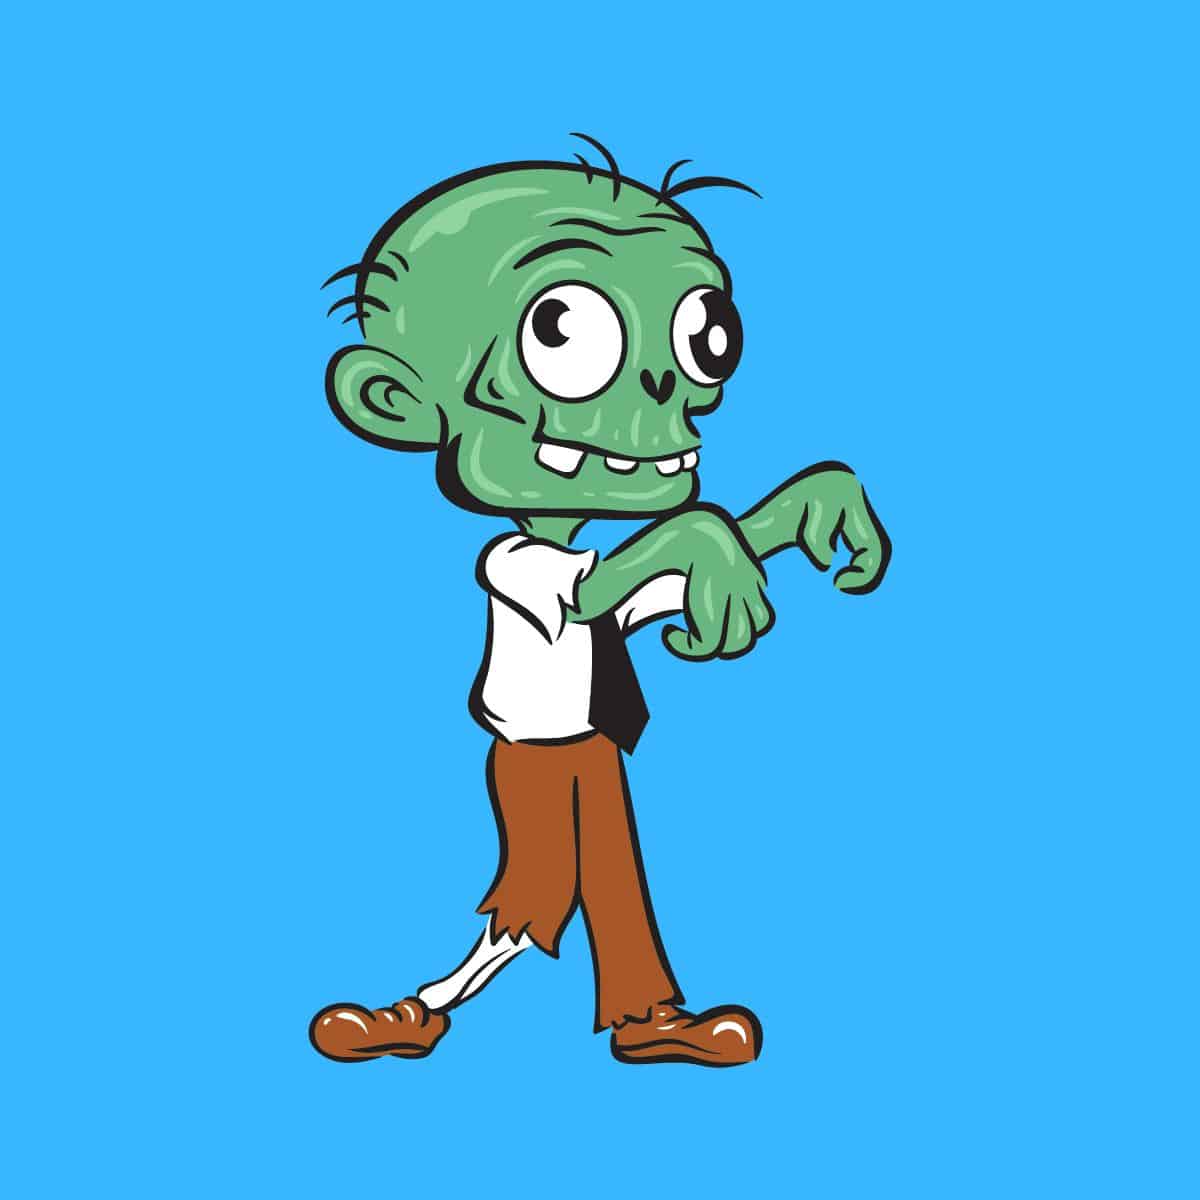 Cartoon graphic of a green zombie with big eyes walking weird on a blue background.